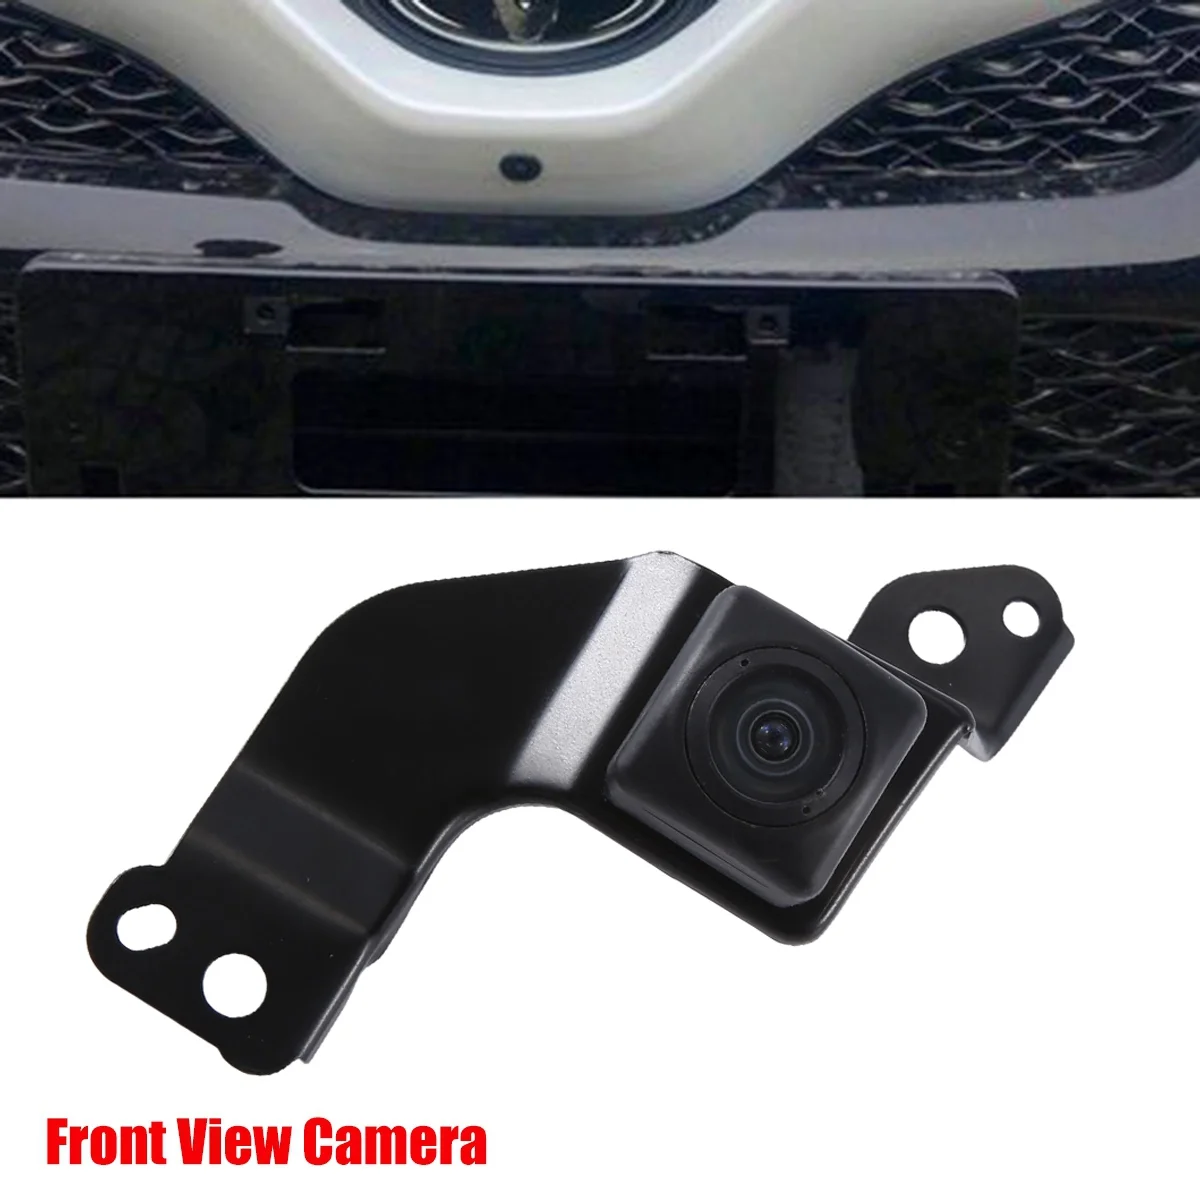 

Car Front View Grille Camera 86790-33190 for Toyota Camry Hybrid MXVA71 AXVA70 AXVH7 Surround Parking ist Camera